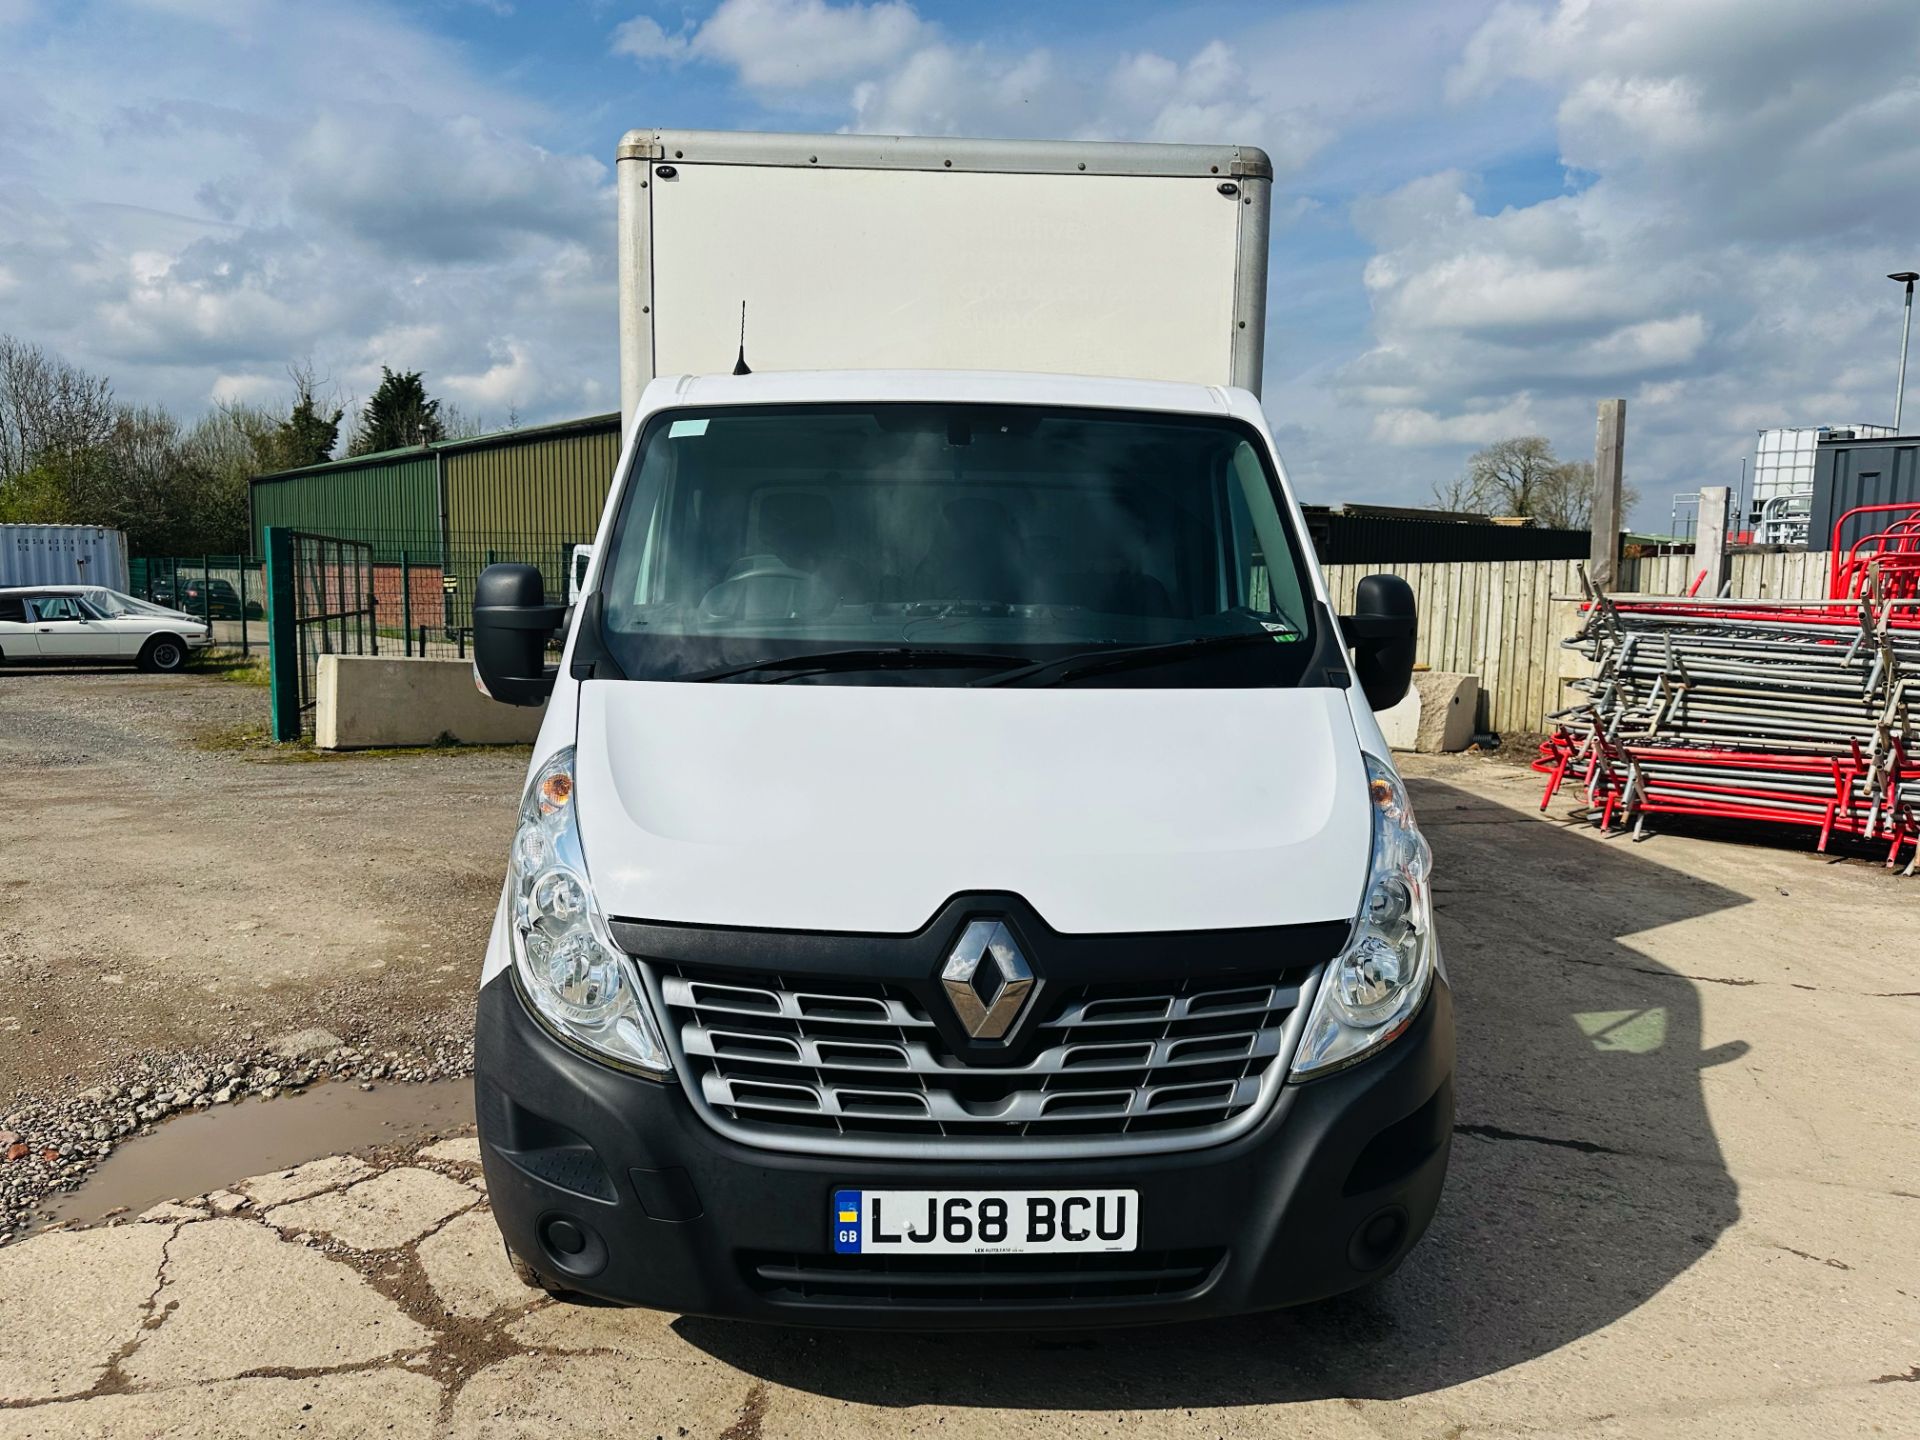 Renault Master 2.3 DCI 130 Business Edition Lwb (Luton / Box Van) - 2019 Model - Euro 6 - Tail Lift - Image 3 of 27